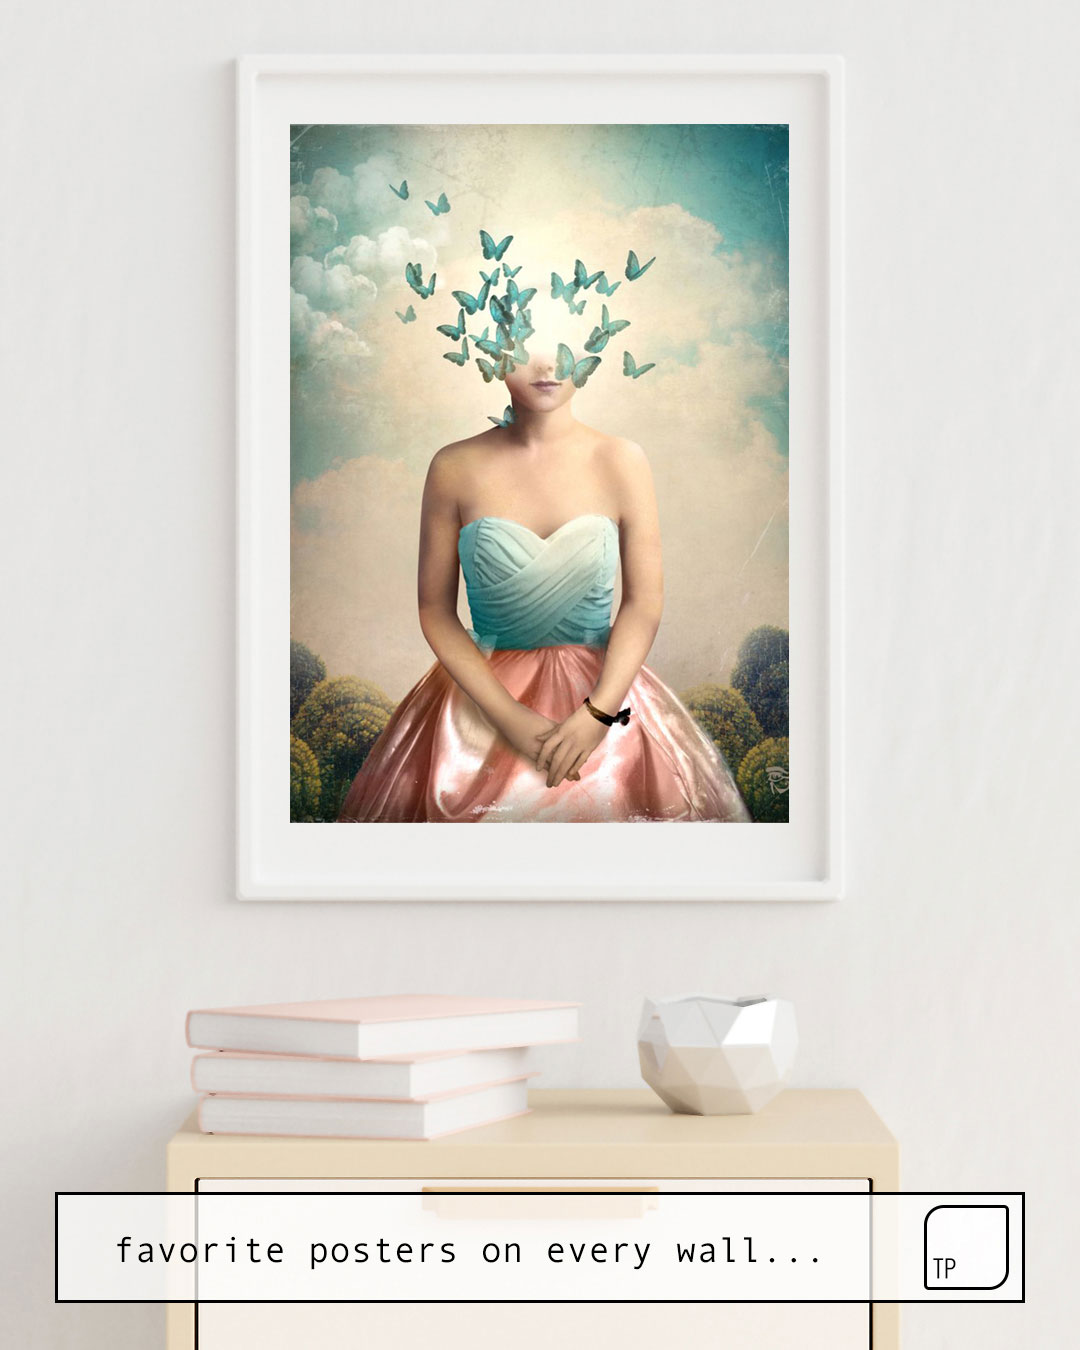 The photo shows an example of furnishing with the motif LITTLE SISTER by Christian Schloe as mural